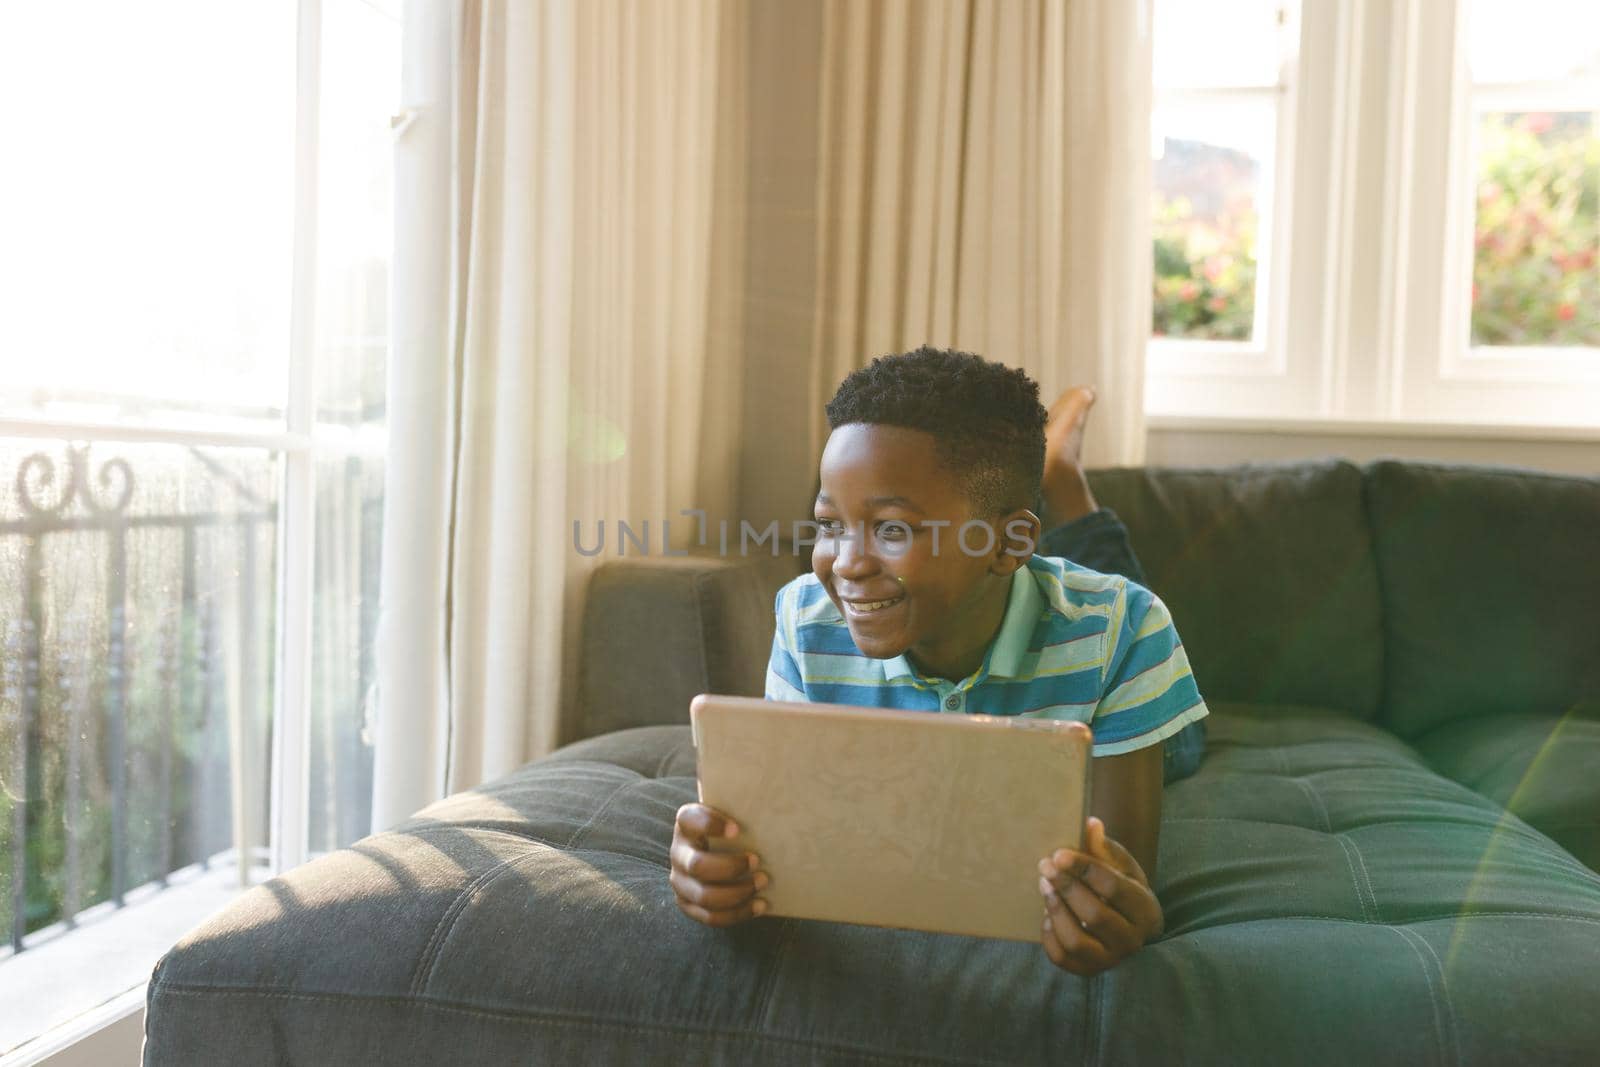 Smiling african american boy using tablet and lying on couch in living room. spending time alone with technology at home.